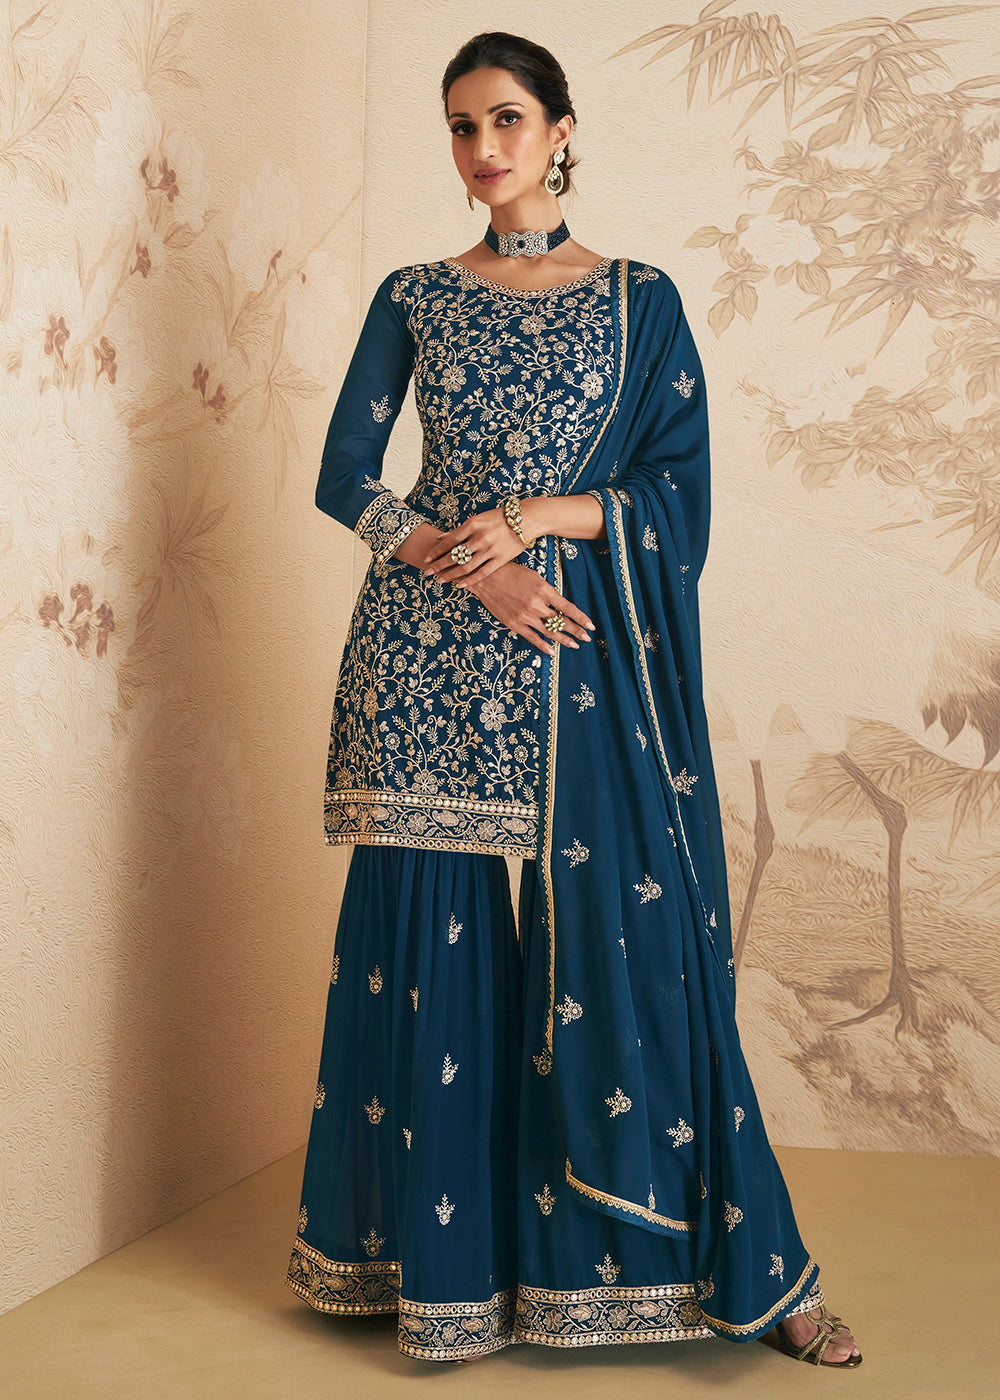 Shop Now Teal Blue Thread & Sequins Embroidered Designer Sharara Suit Online at Empress Clothing in USA, UK, Canada, Germany & Worldwide. 